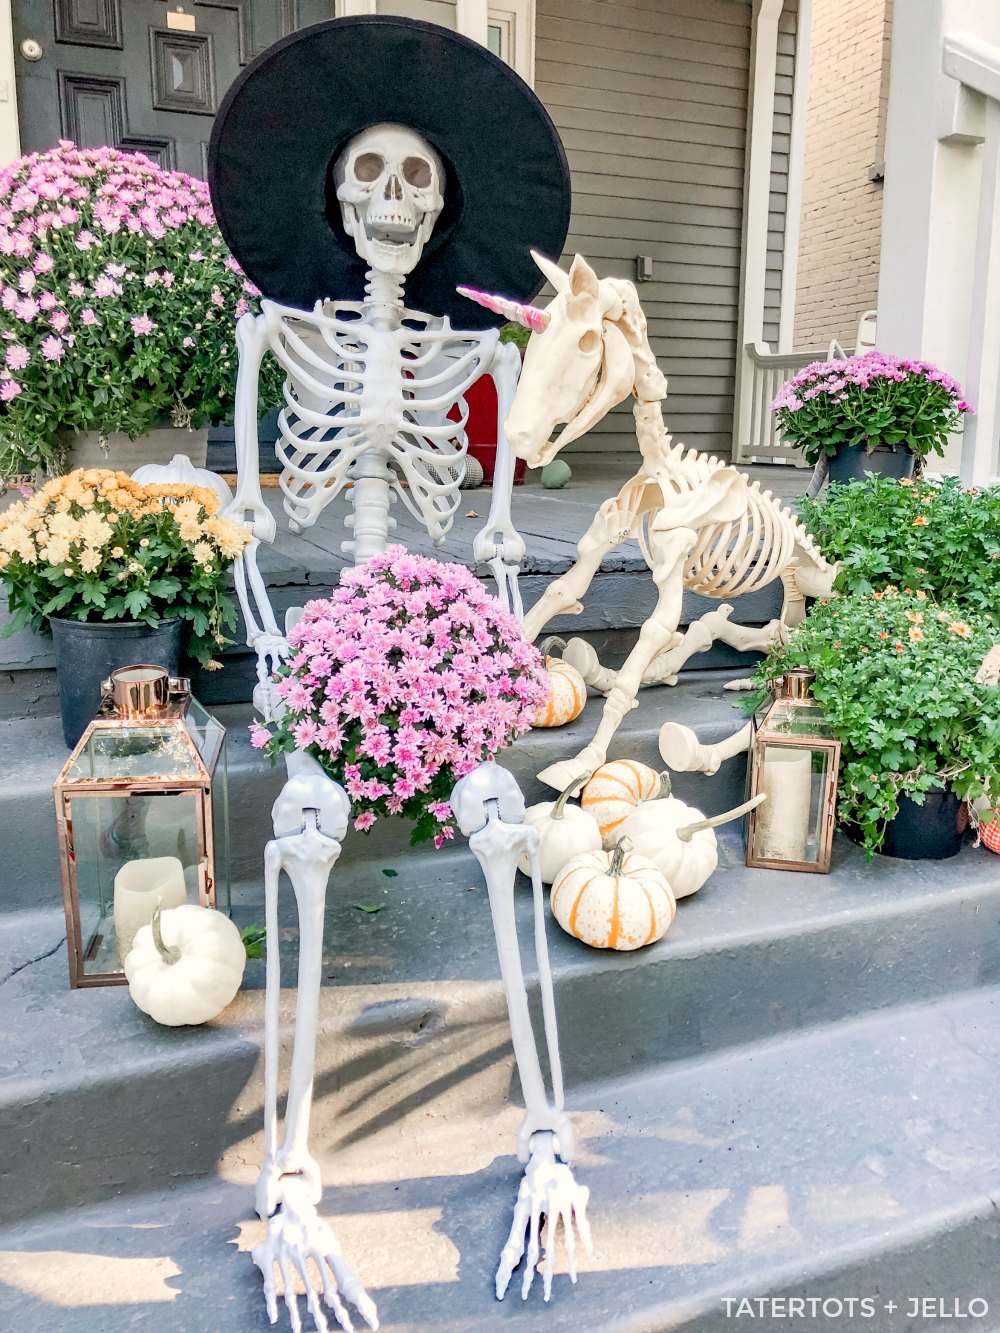 7 Easy Ways to Create a Spooky Skeleton Halloween Porch! Add fresh flowers, lanterns, signs, banners and wreaths to create the perfect spooky Halloween porch! 